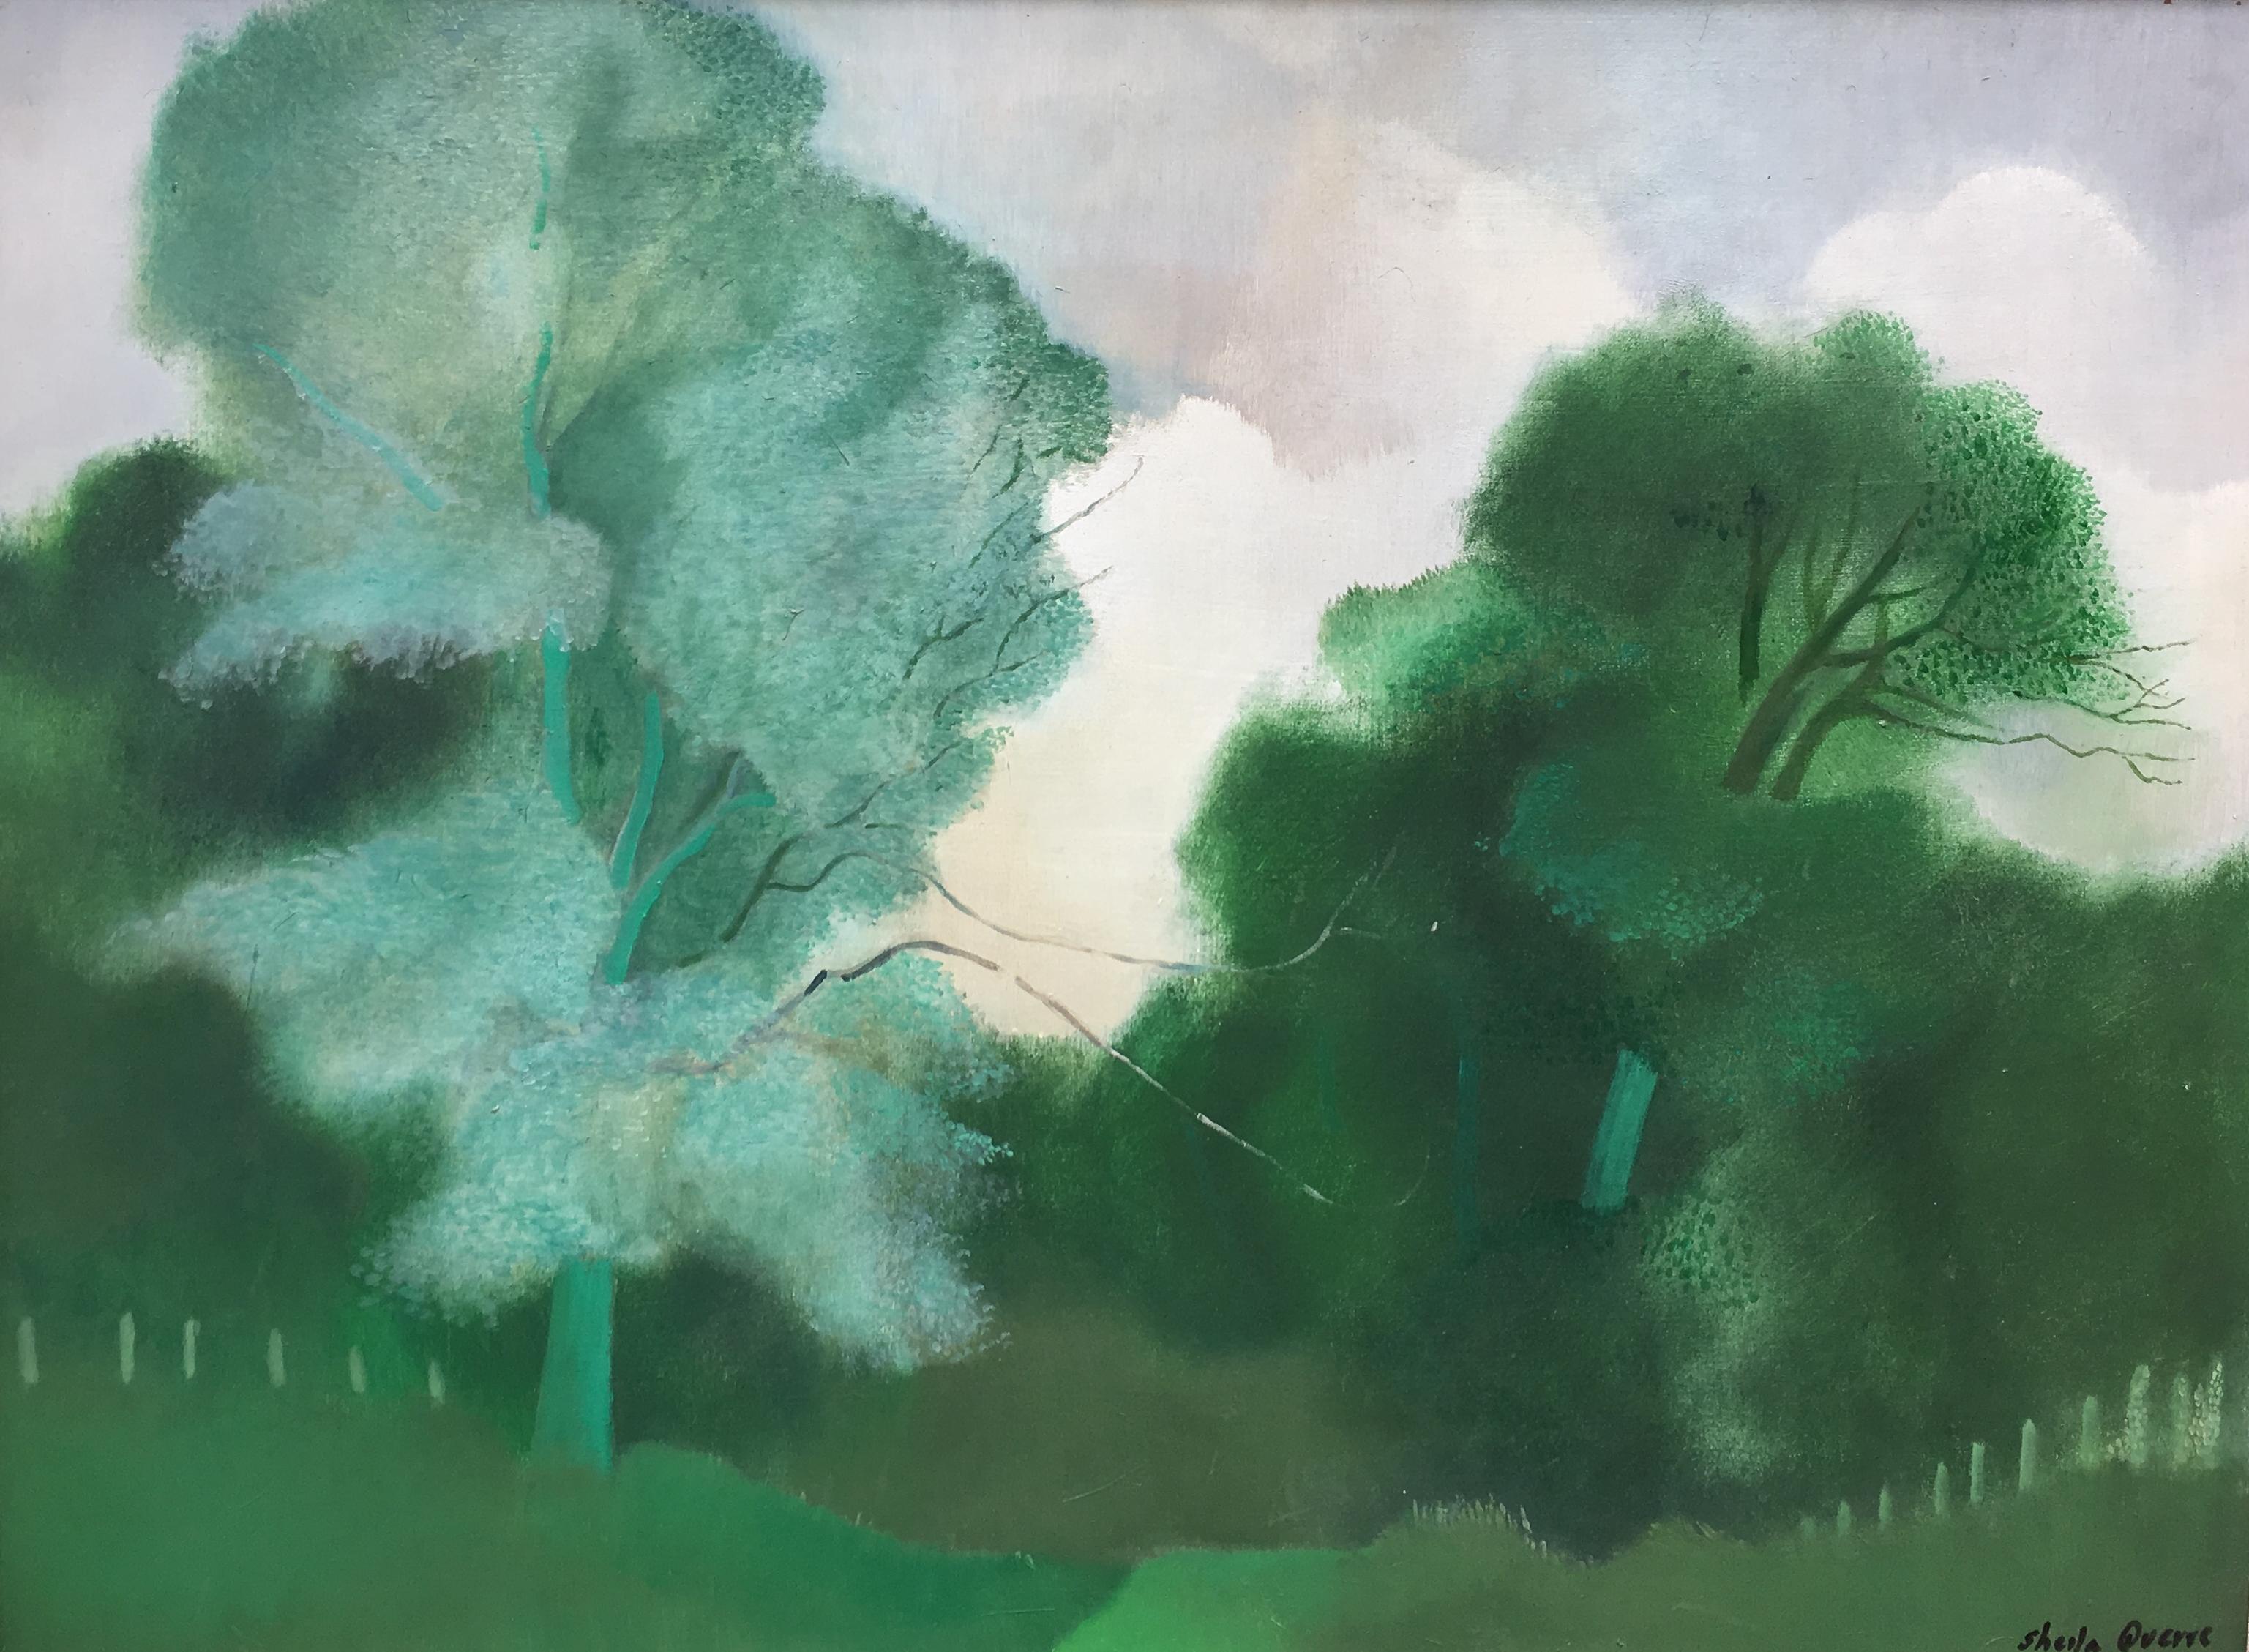 "The Palus, Bretagne", vision of a leafy and green landscape of Le Palus, in French Brittany in Romantic style by Sheila Querre.
Dimension art cm: 60 H x 81 W 
Dimension framed cm: 78 H x 98 W x 5 D

The colours of the original work are a bit